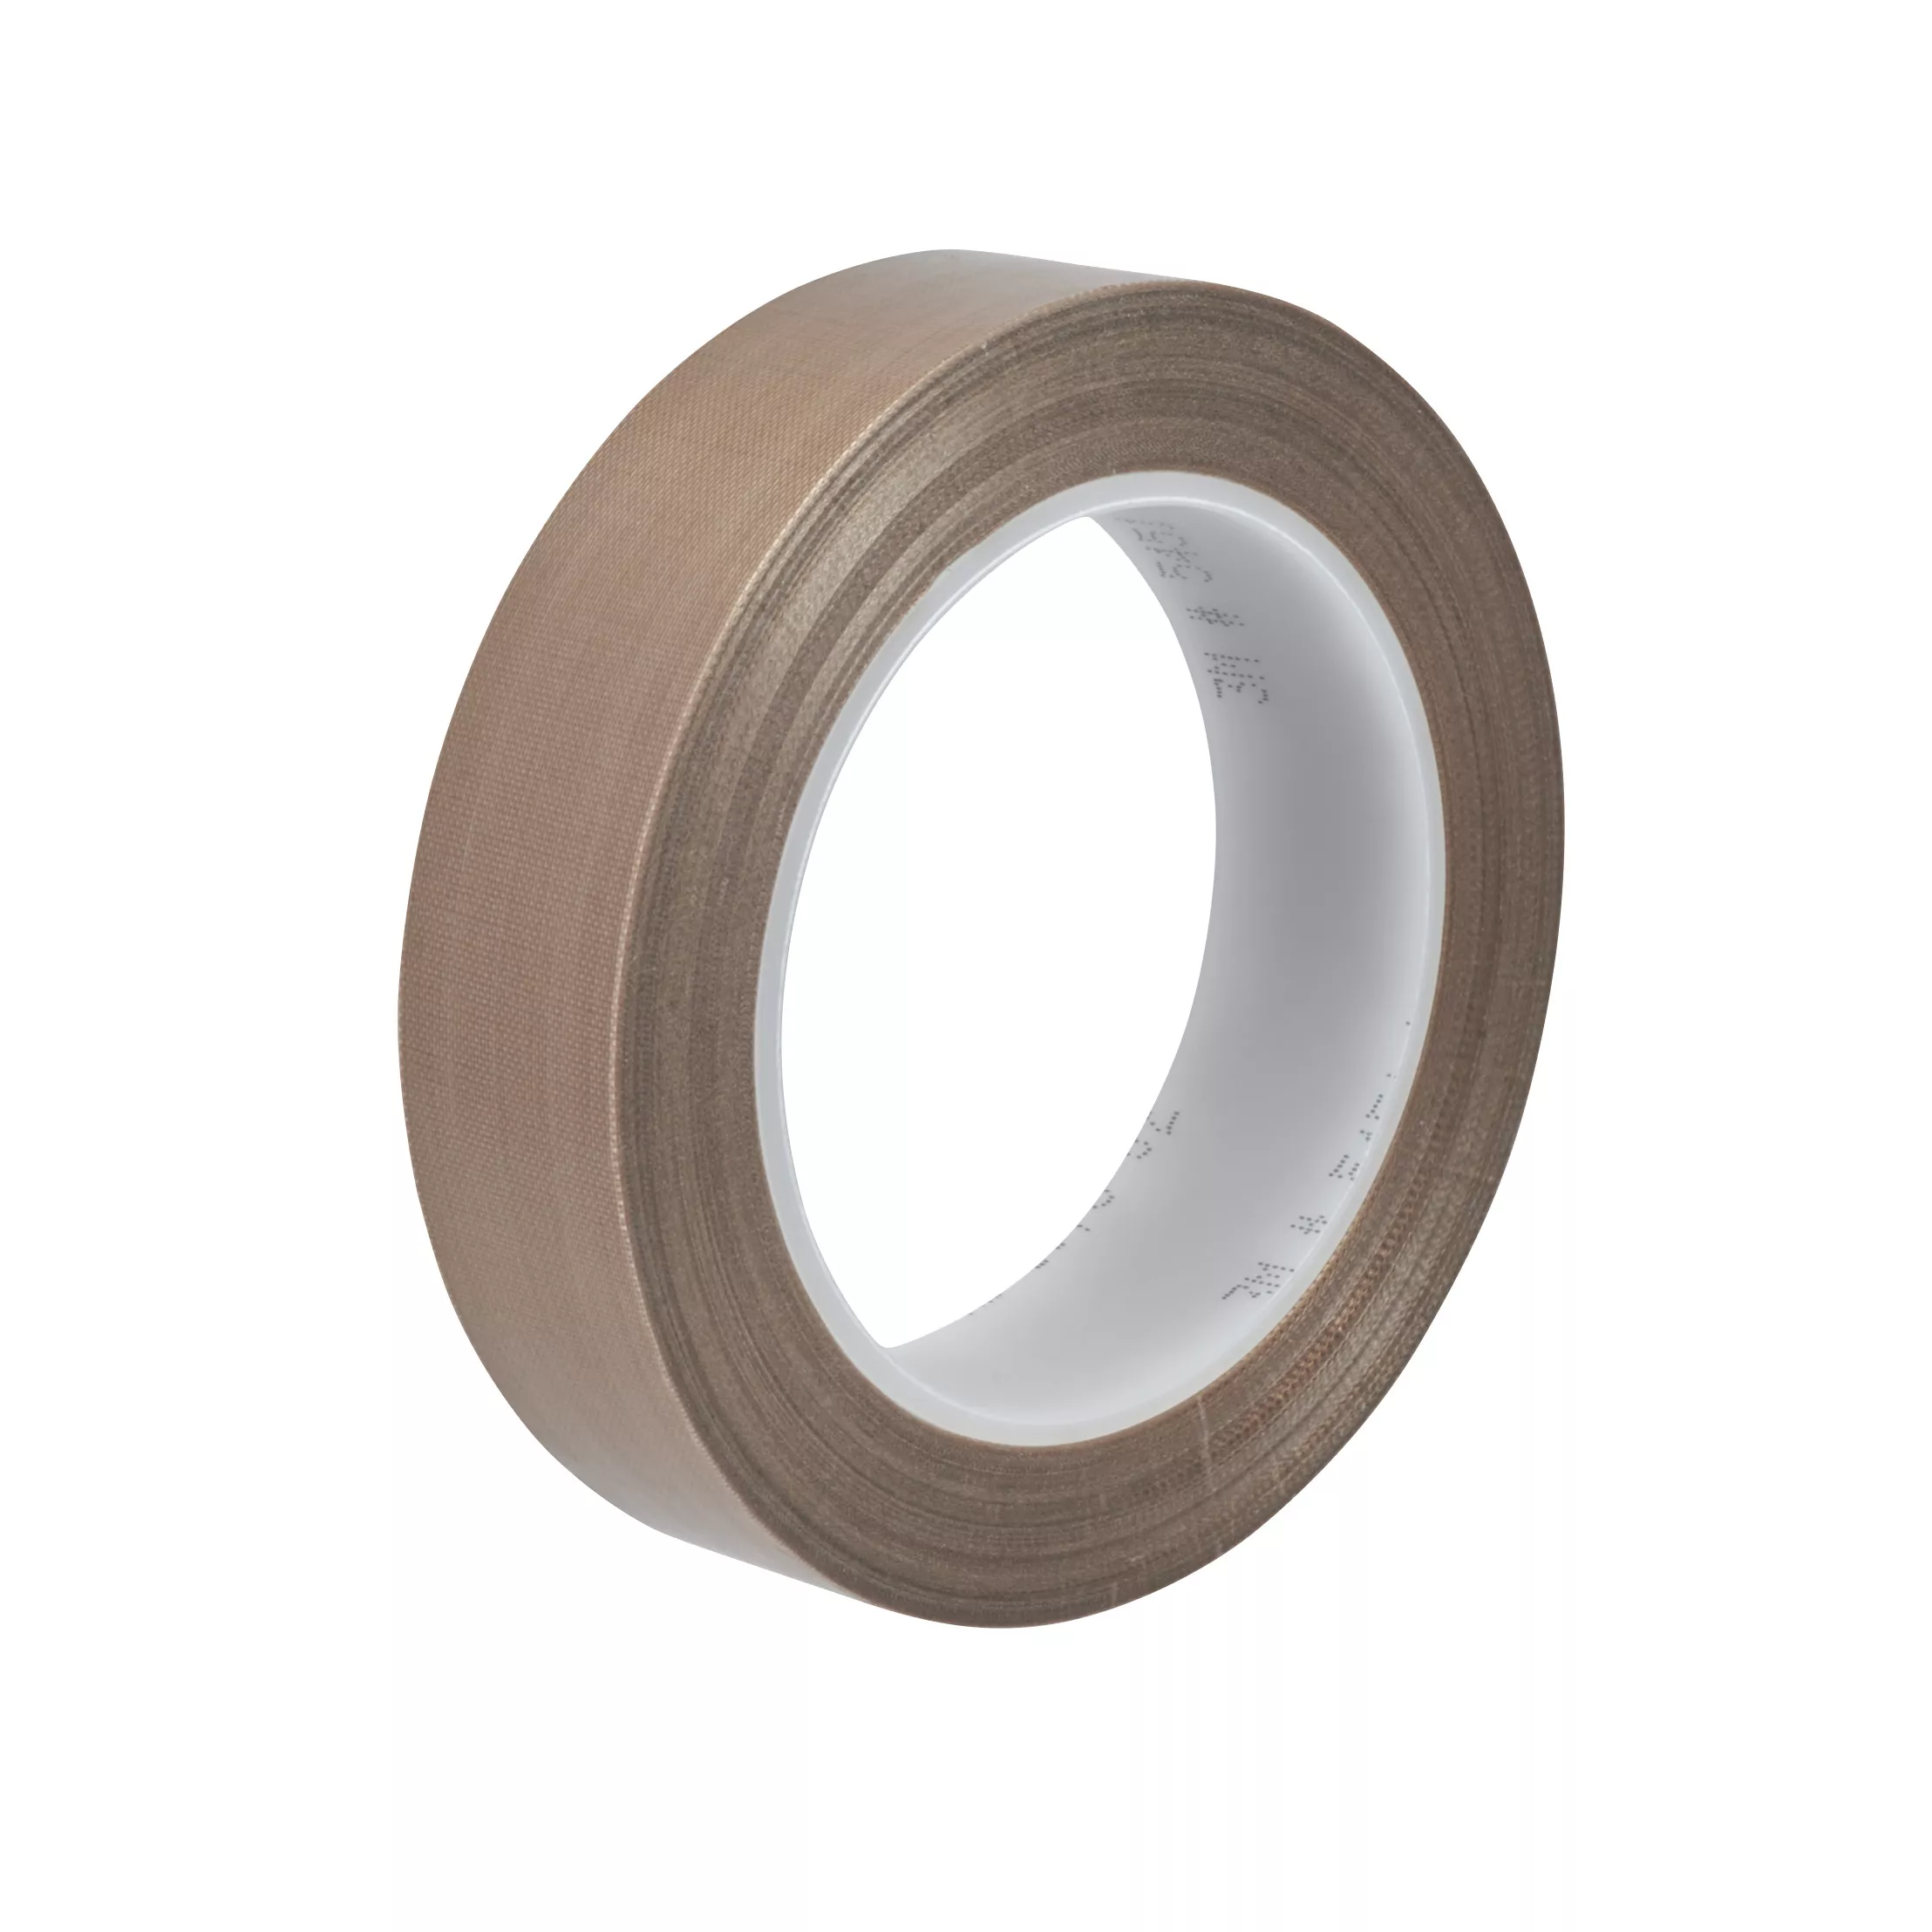 3M™ PTFE Glass Cloth Tape 5451, Brown, 1 in x 36 yd, 5.6 mil, 9
Roll/Case